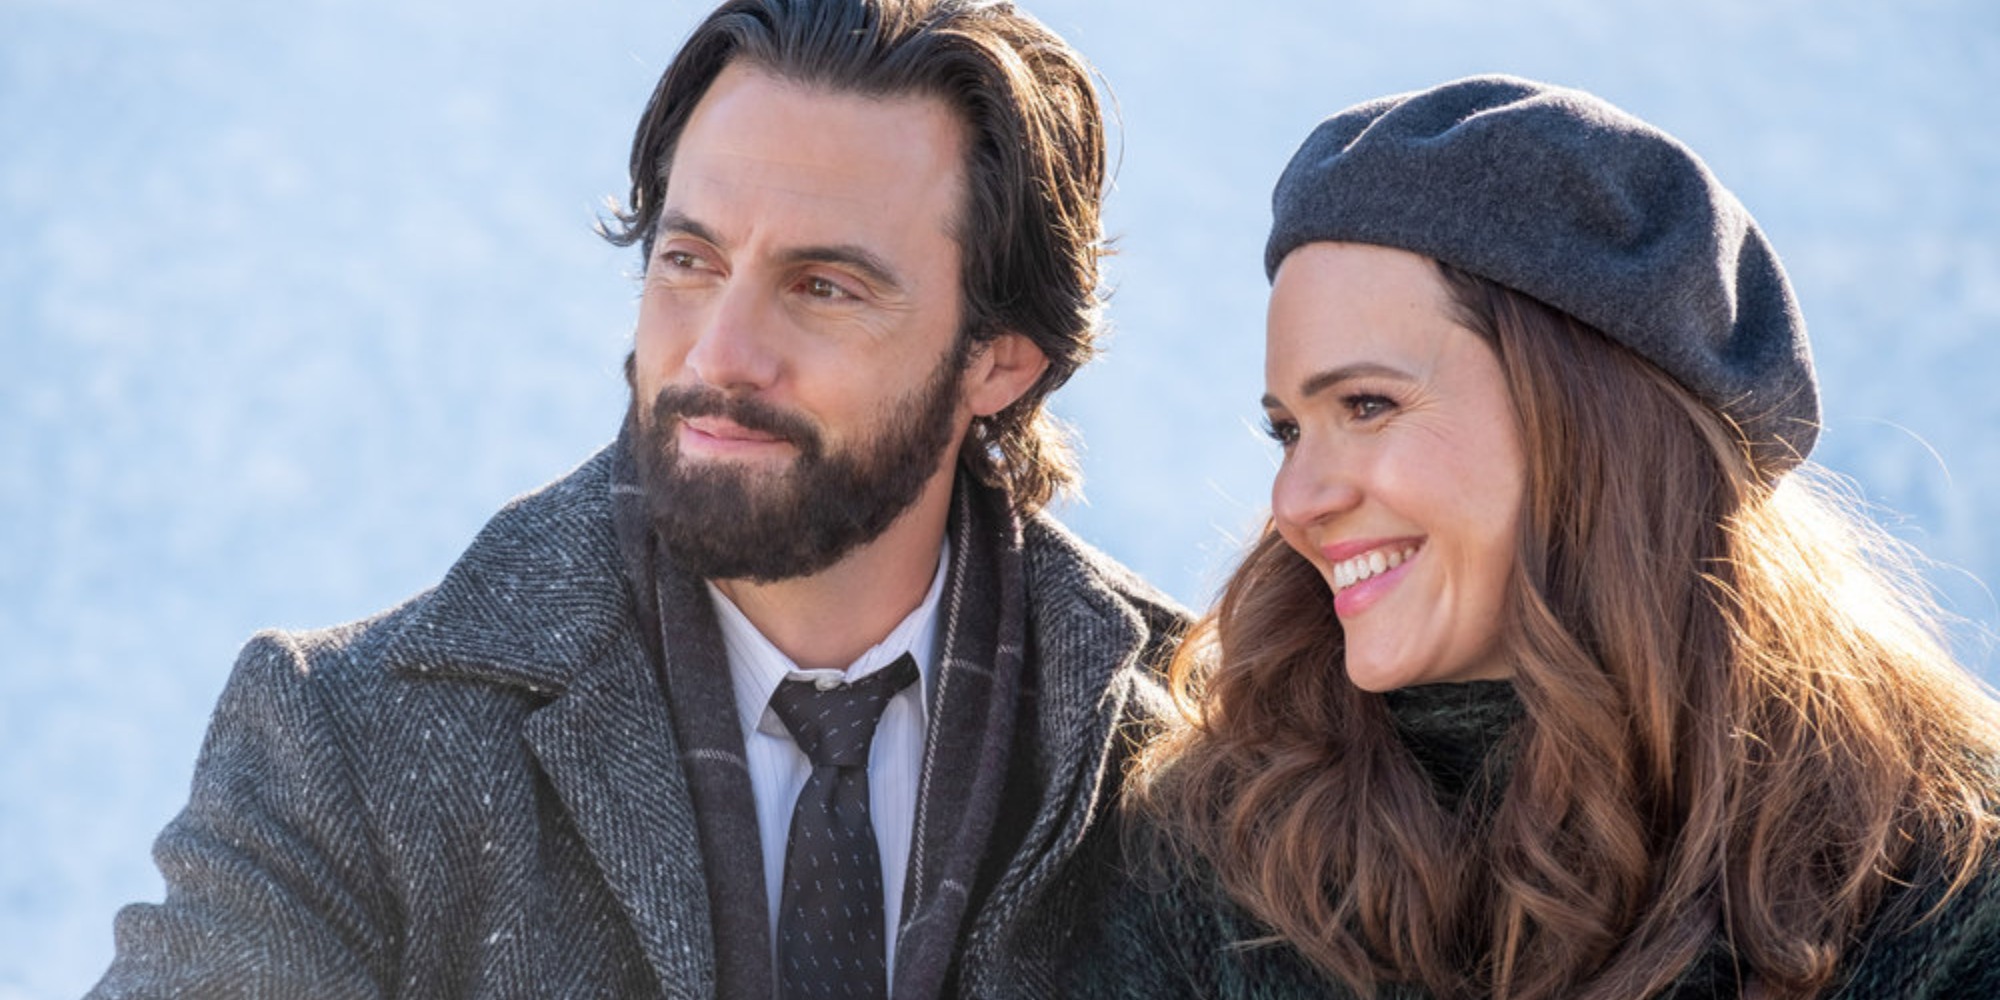 Mandy Moore and Milo Ventimiglia on the set of "This Is Us."